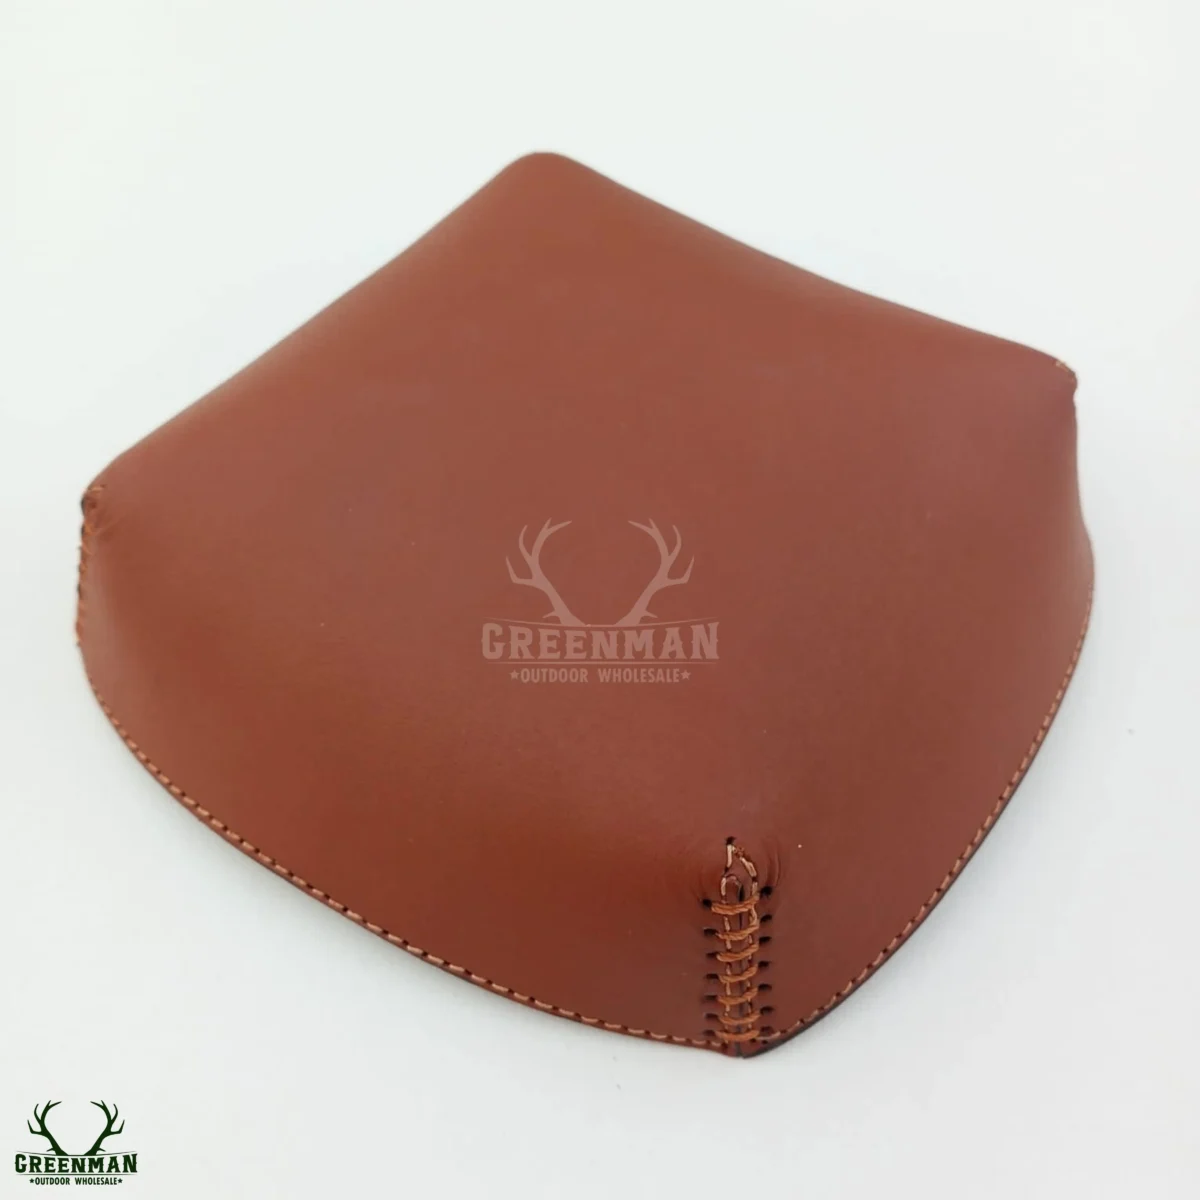 leather valet tray, tan leather valet tray